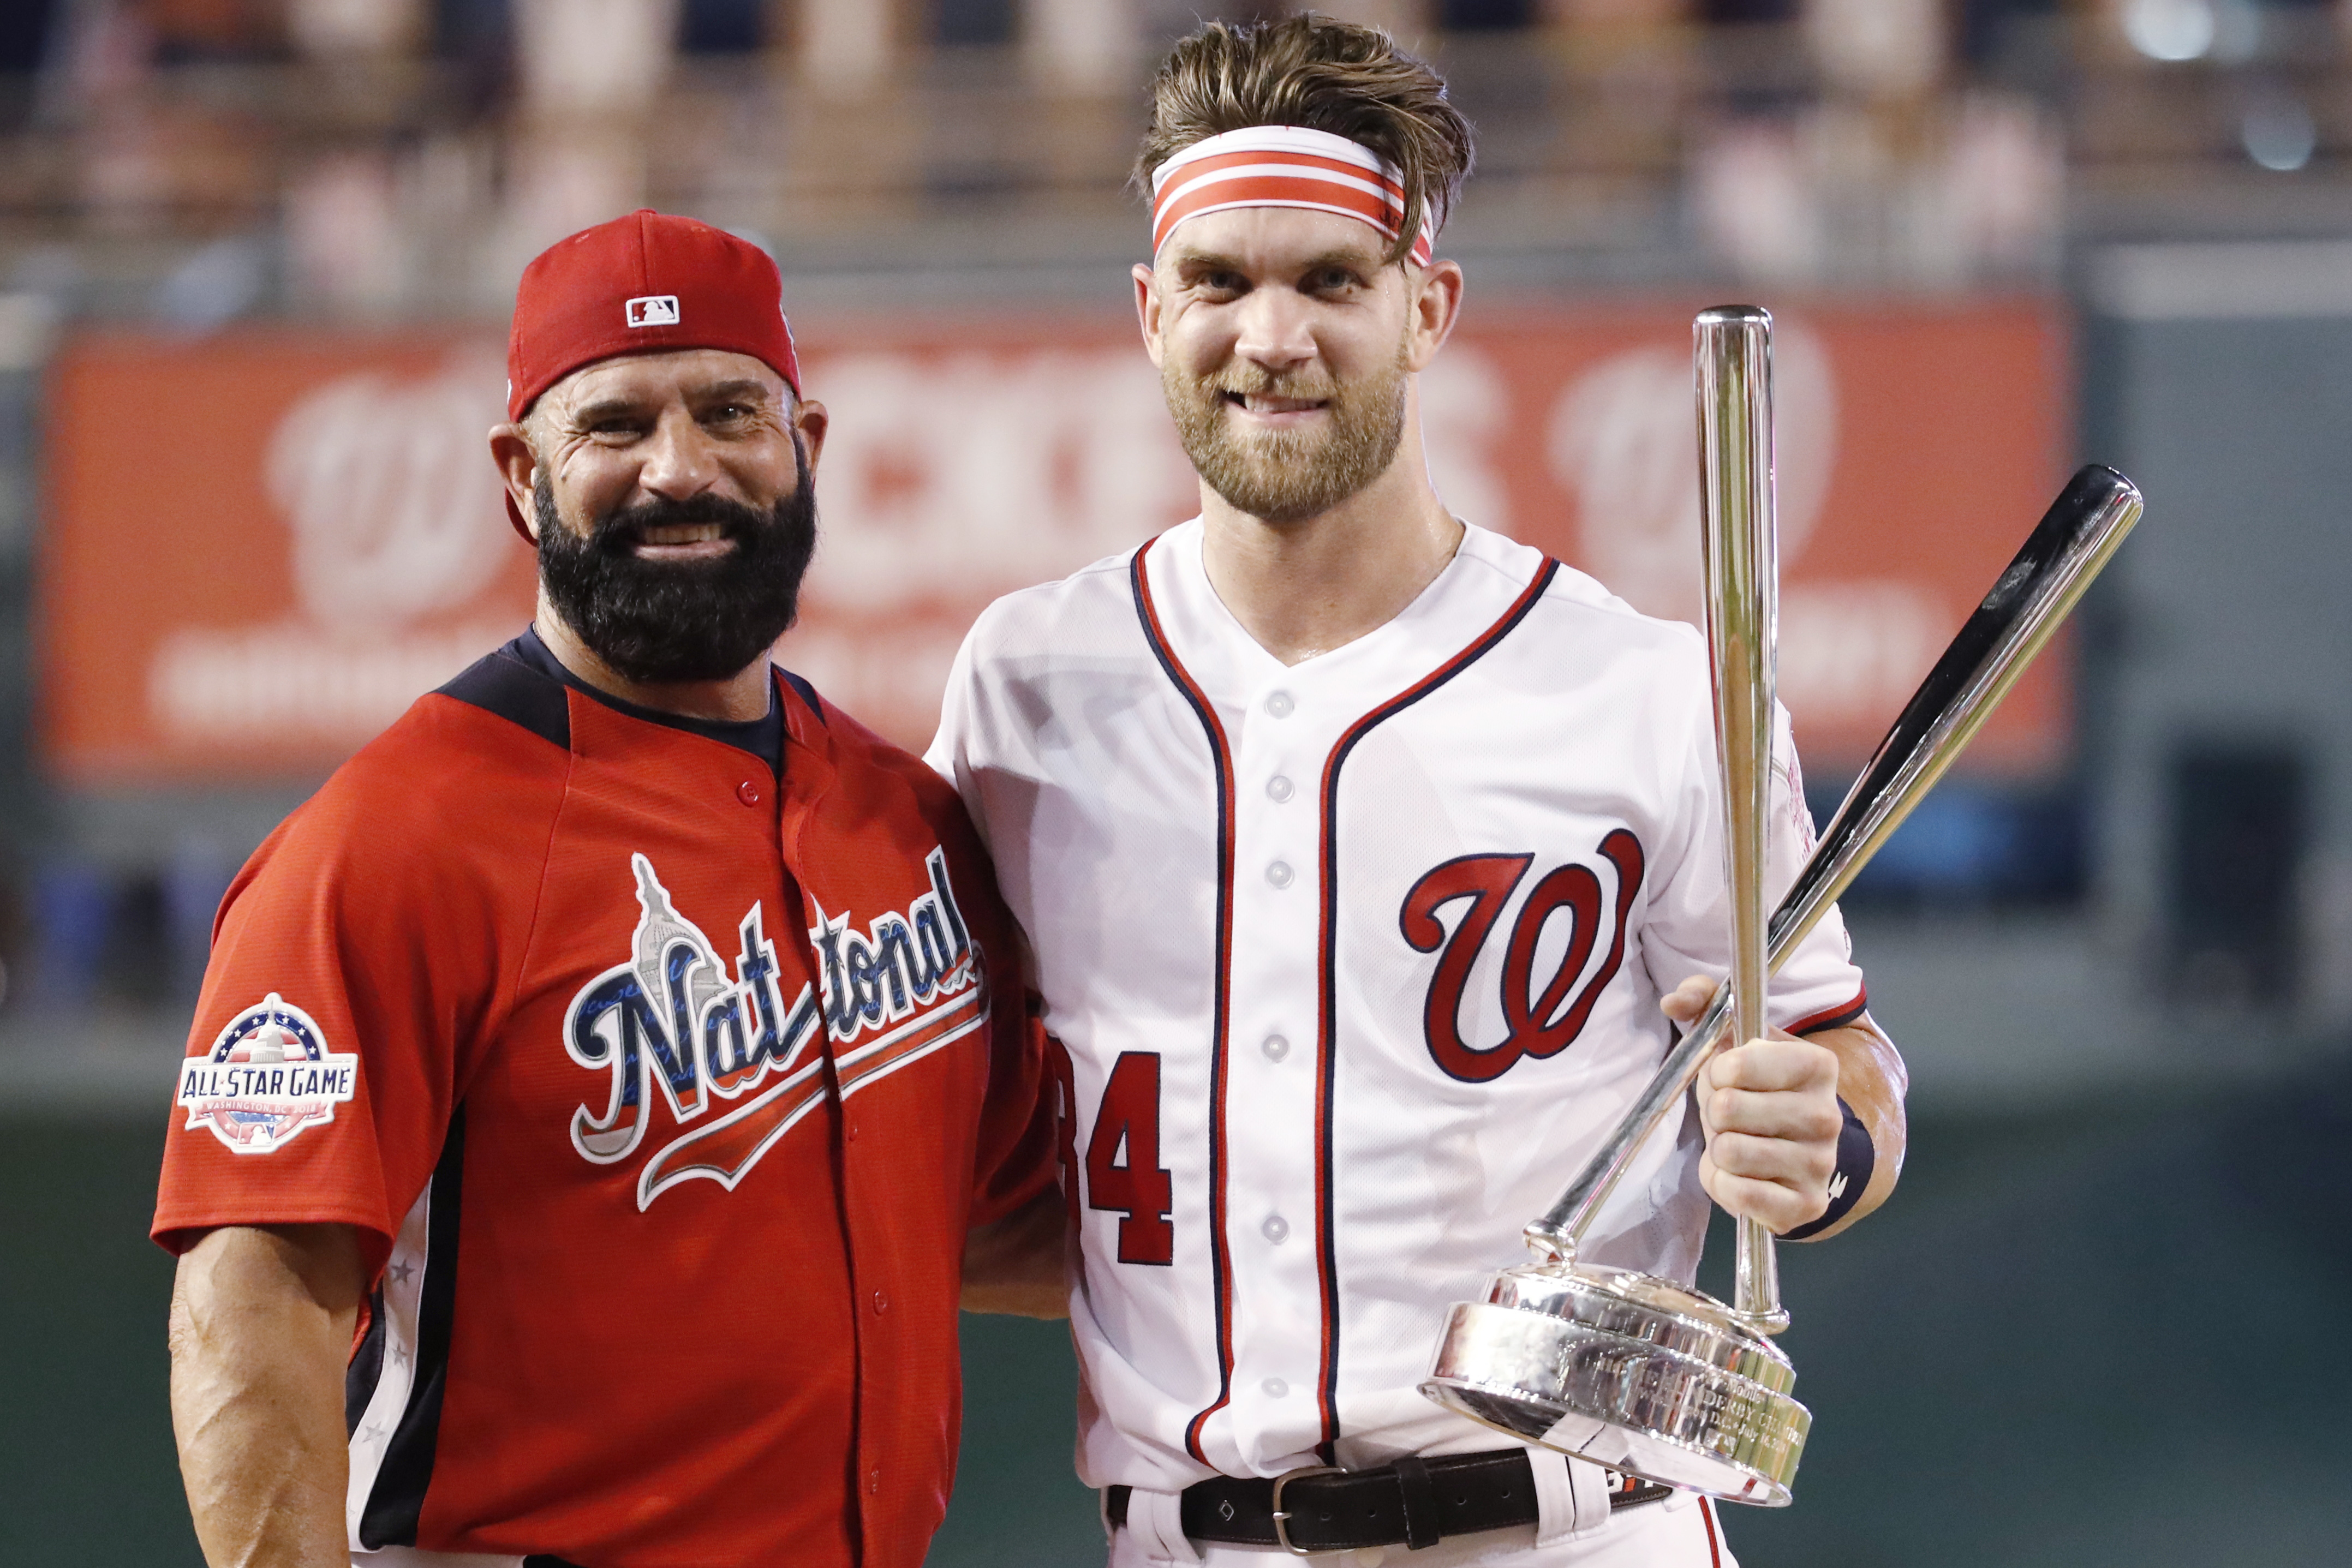 Rehabbing Phillies star Bryce Harper goes with a tried-and-true